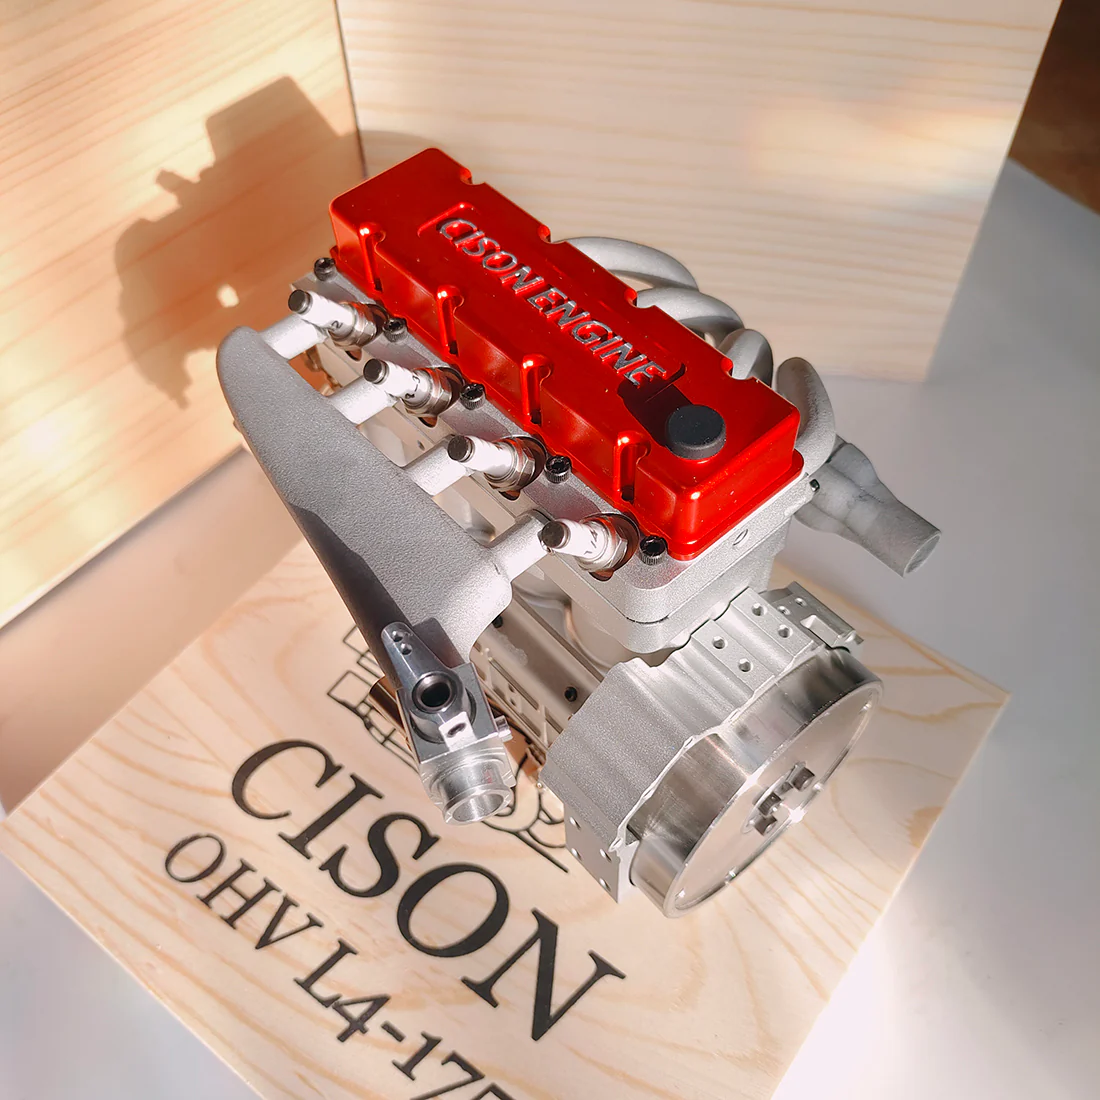 CISON L4-175 17.5cc Miniature OHV Four-cylinder Four-Stroke Engine Kits that Runs on Gas for RC Cars Ships 1